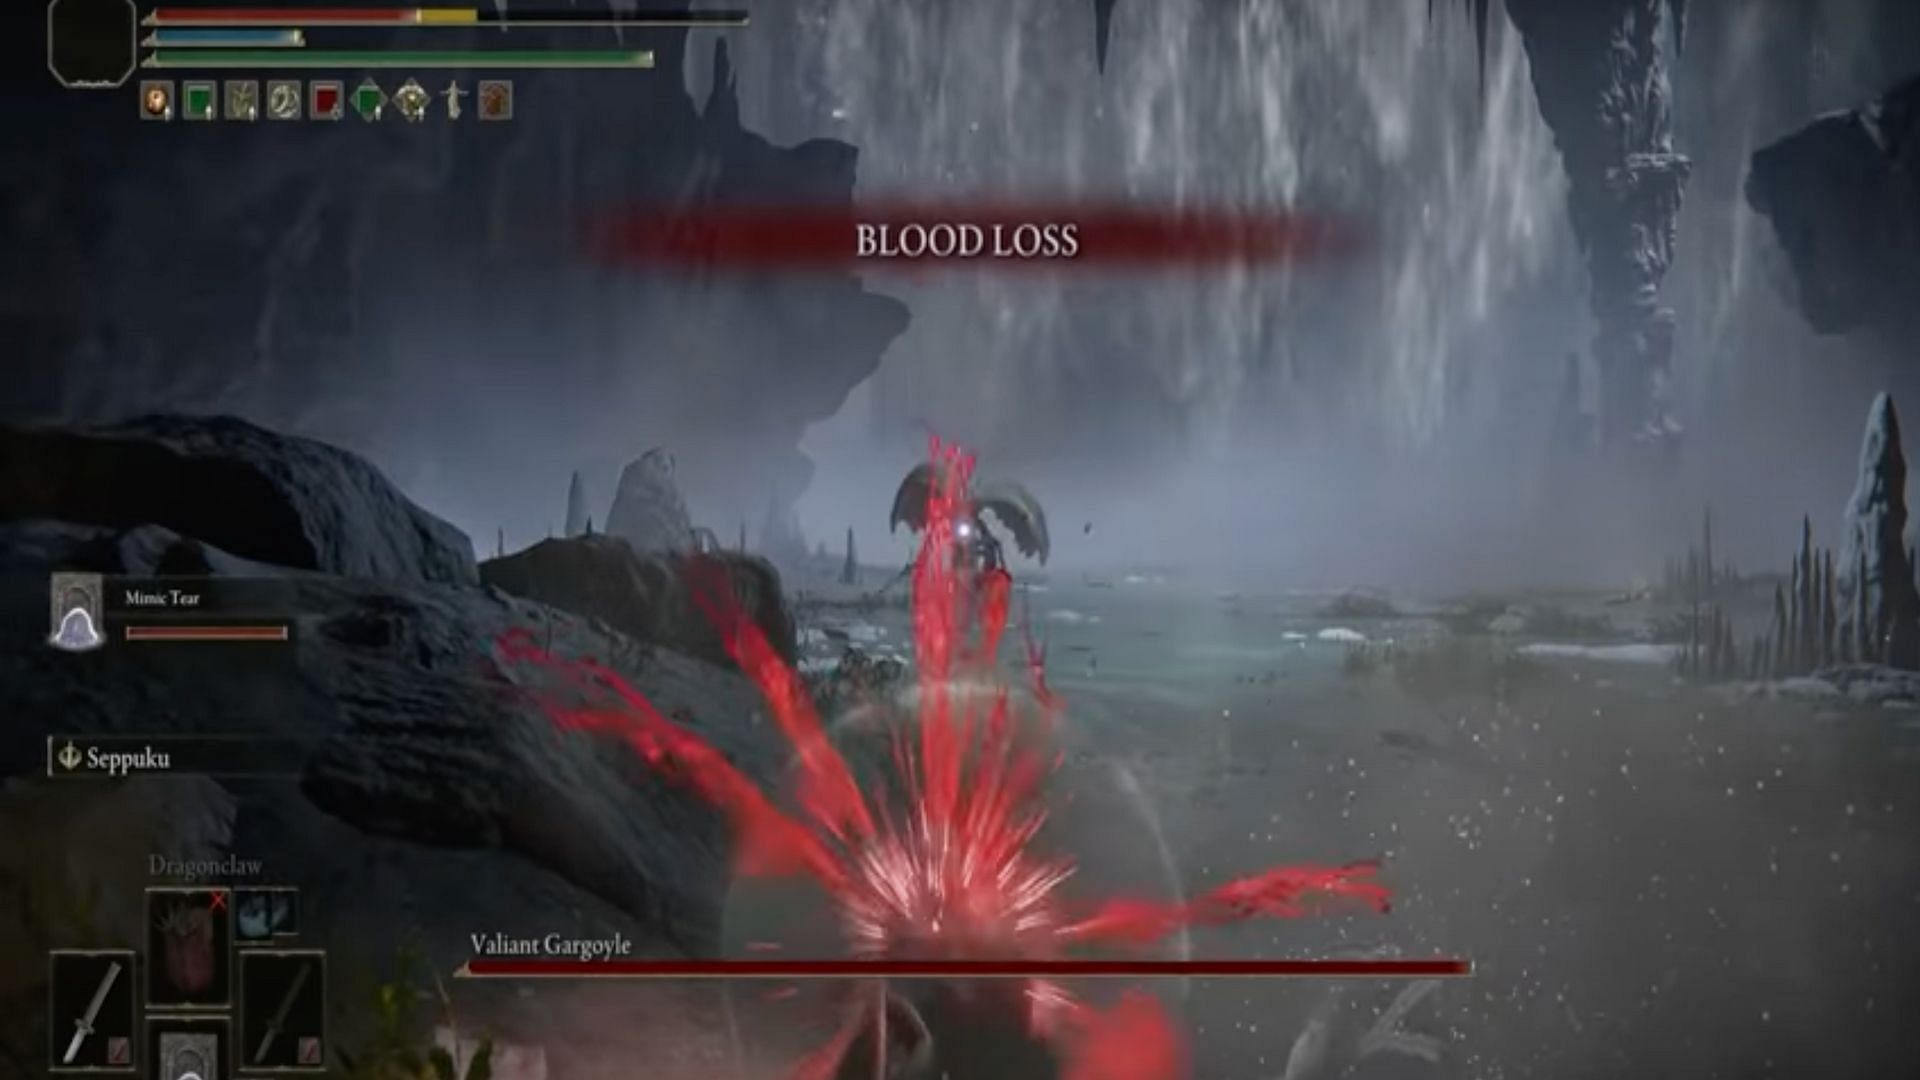 Players of Elden Ring can find a very strong build using Bleed ability and the Ash of War: Seppuku (Image via Arekkz Gaming/YouTube)